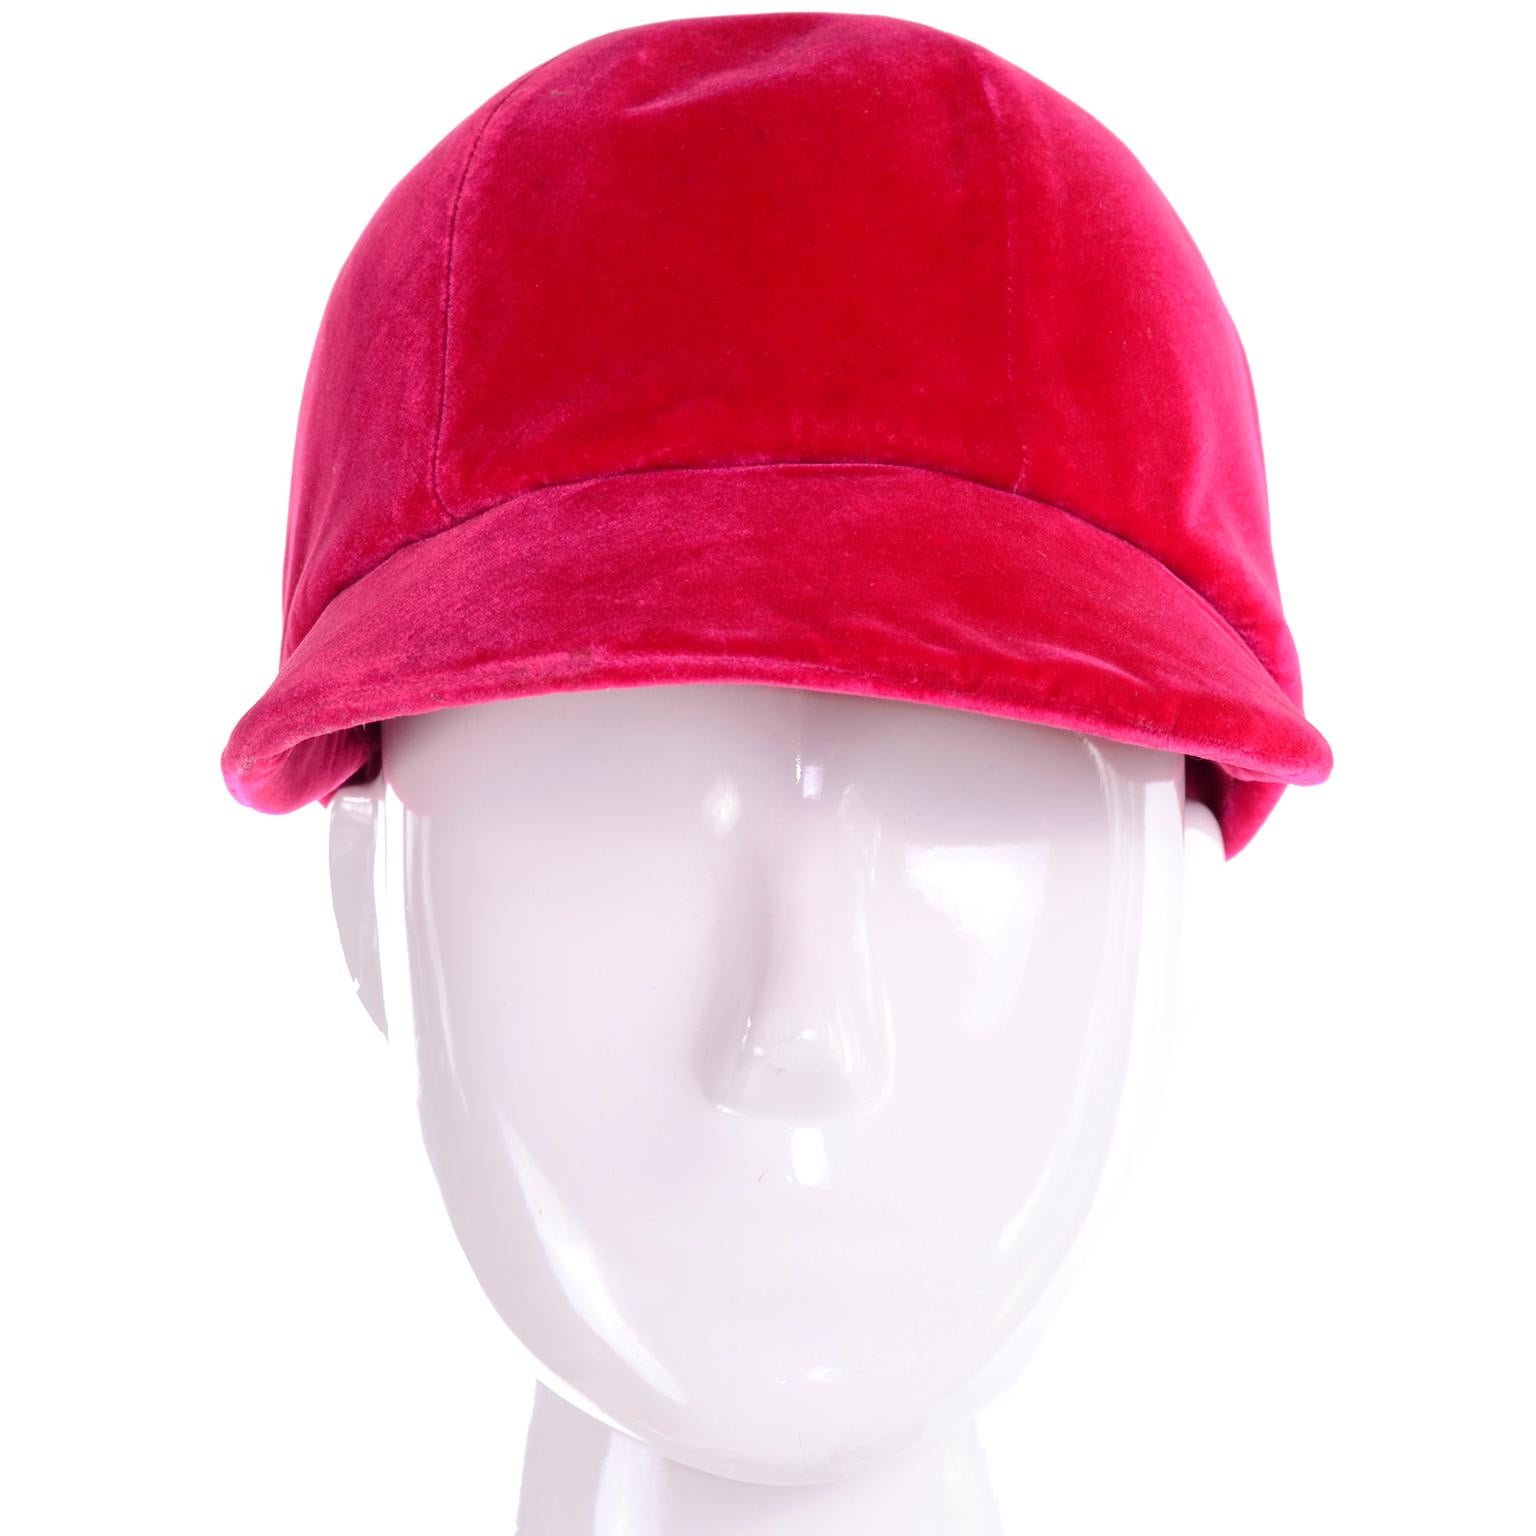 This is a lovely vintage velvet equestrian style riding had from Emme New York.  The hat is a size small and is in a lovely shade of red with Ivory satin lining. This vintage red cap can add style to any outfit!